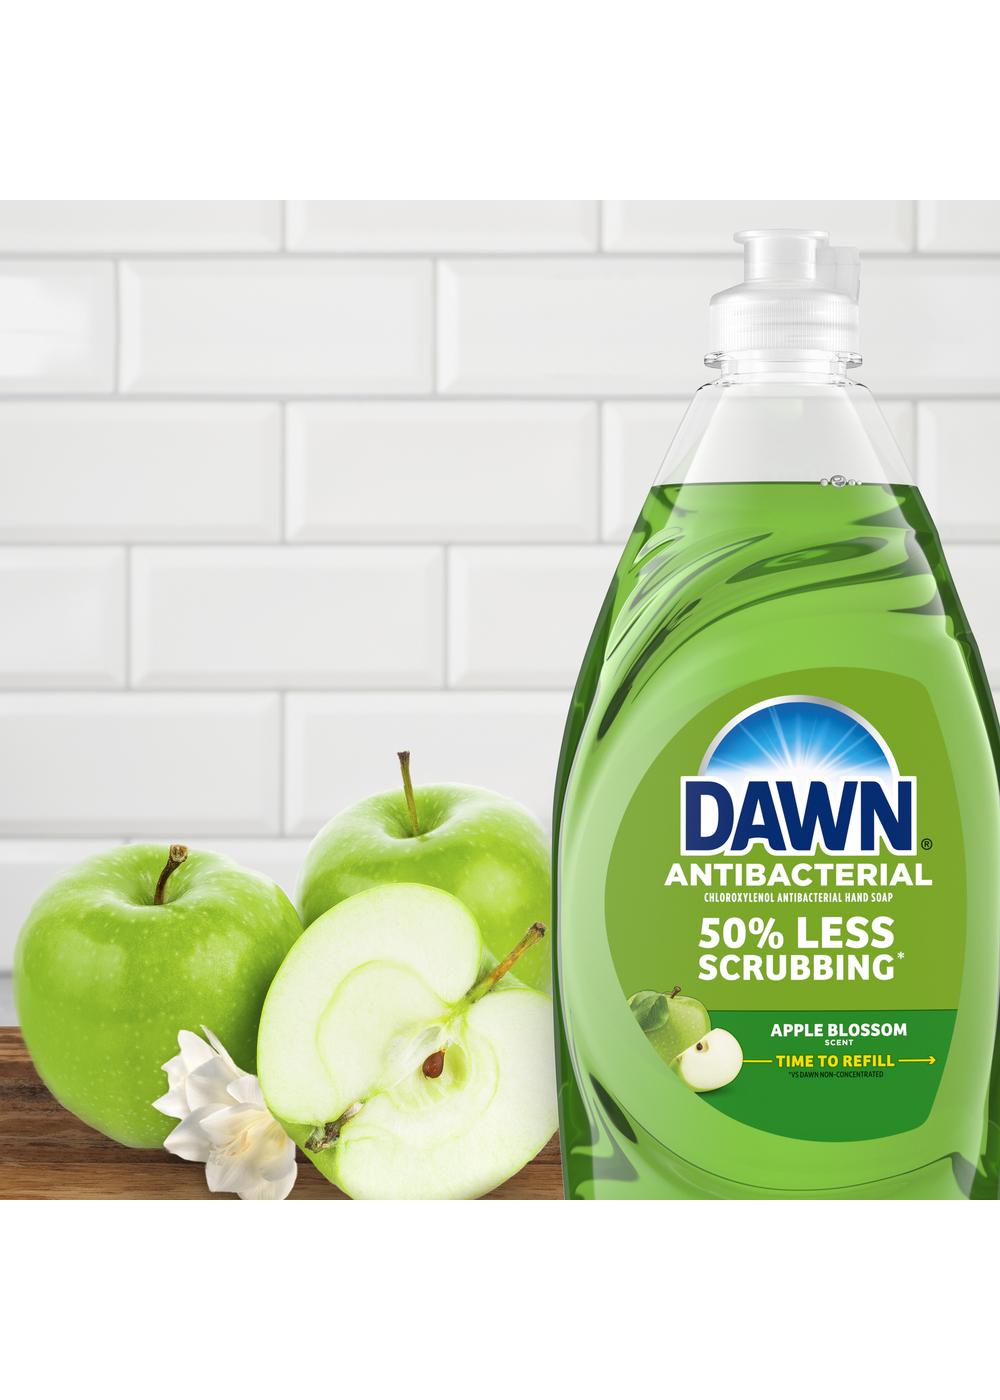 Dawn Ultra Antibacterial Hand Soap - Apple Blossom; image 2 of 6